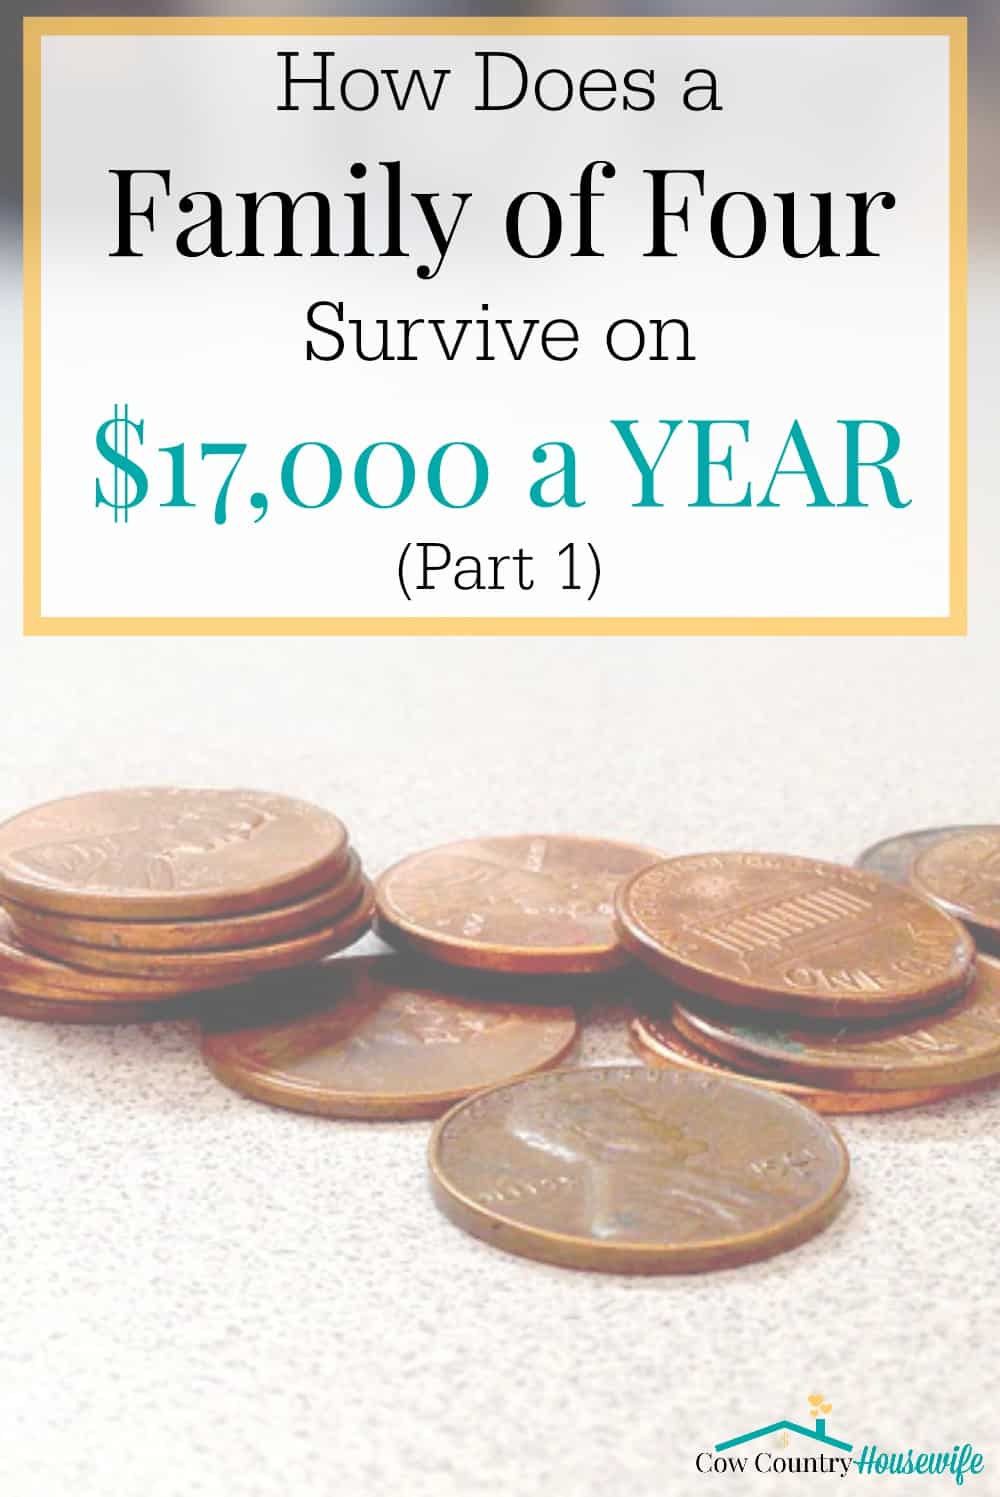 How Does a Family of Four Survive on $17,000 a YEAR? It wasn't easy, but we did it. AND still managed to buy 2 cars, a house, and build up a savings account. Here's how we did it...